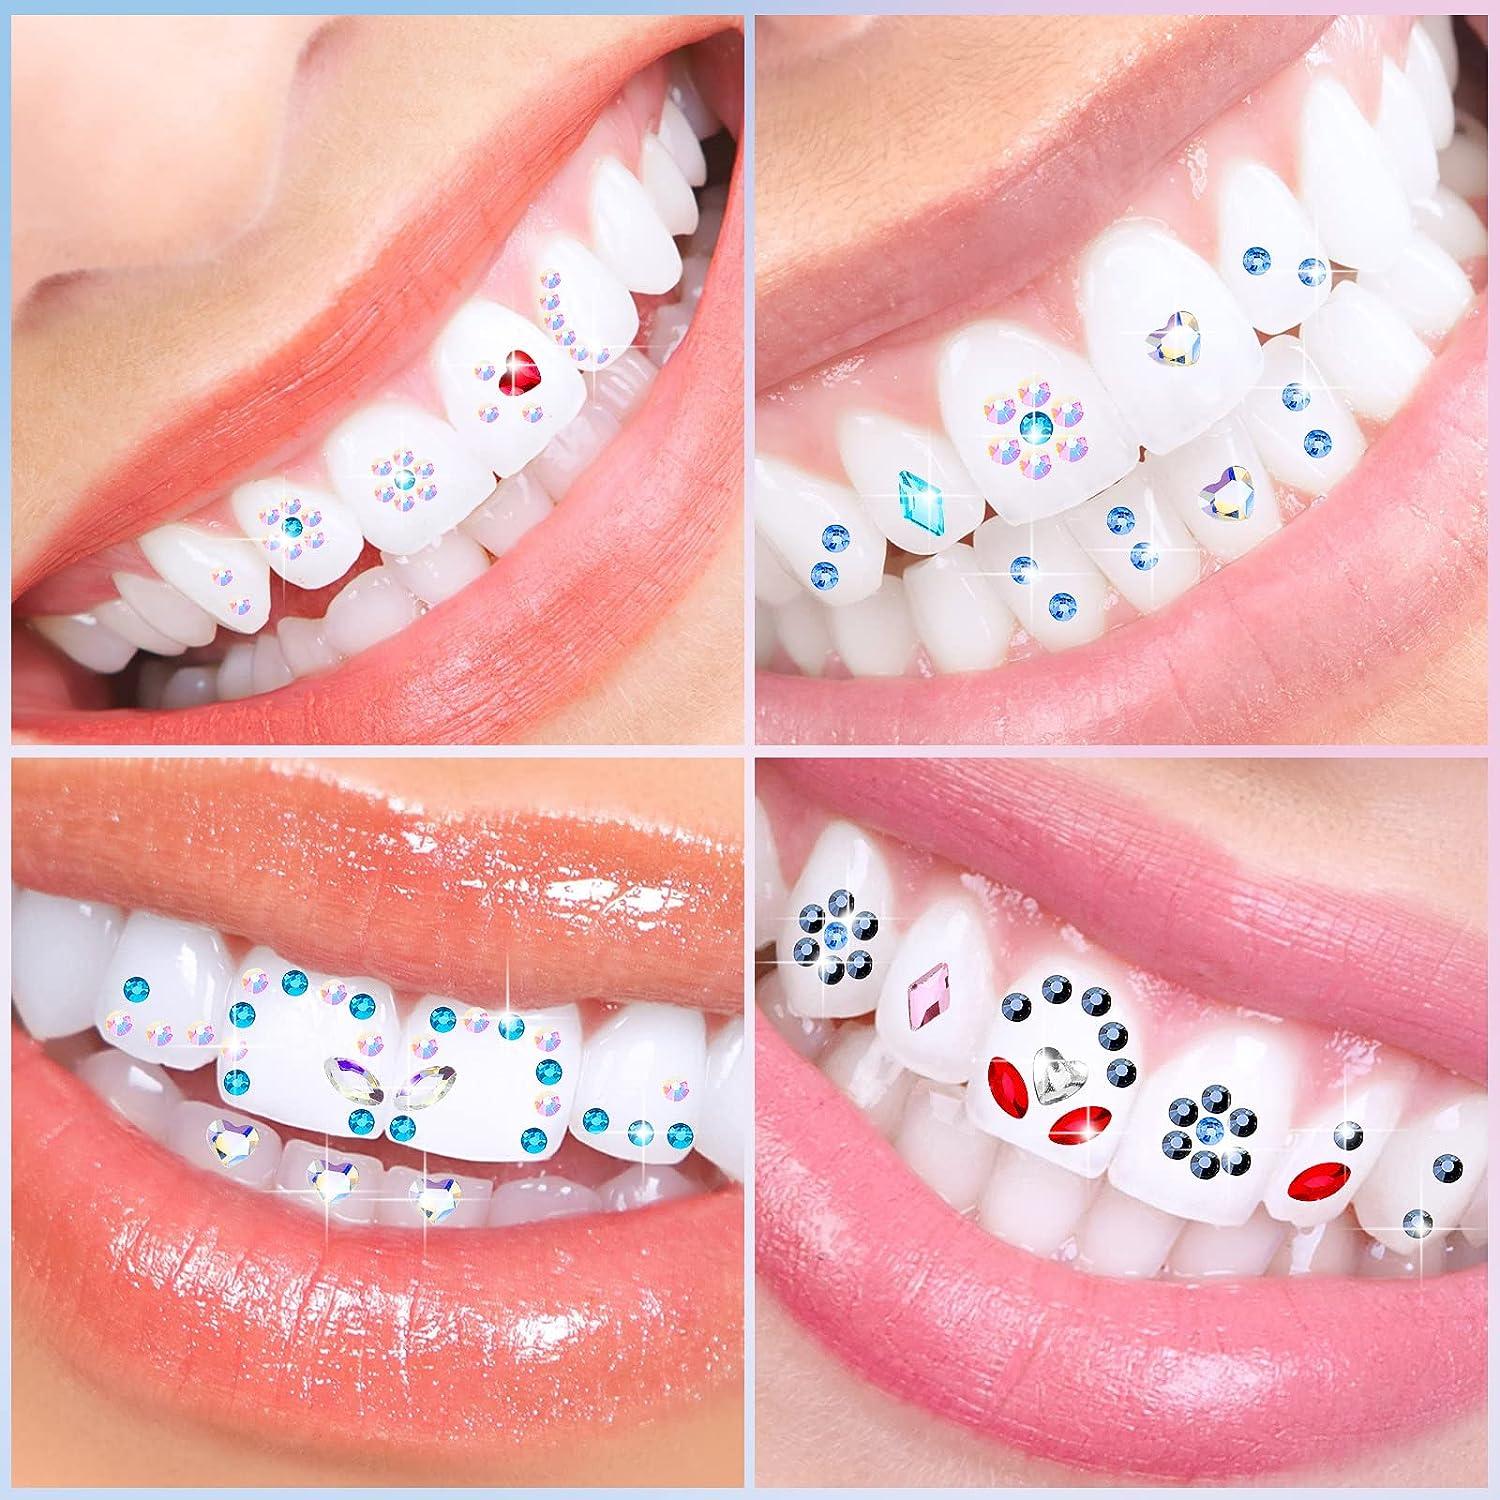 Healifty 4 Sets drill teeth crystals teeth gems decor gems for tooth teeth  jewelry ornament teeth gems nail accessories charms tooth jewelry gems kit